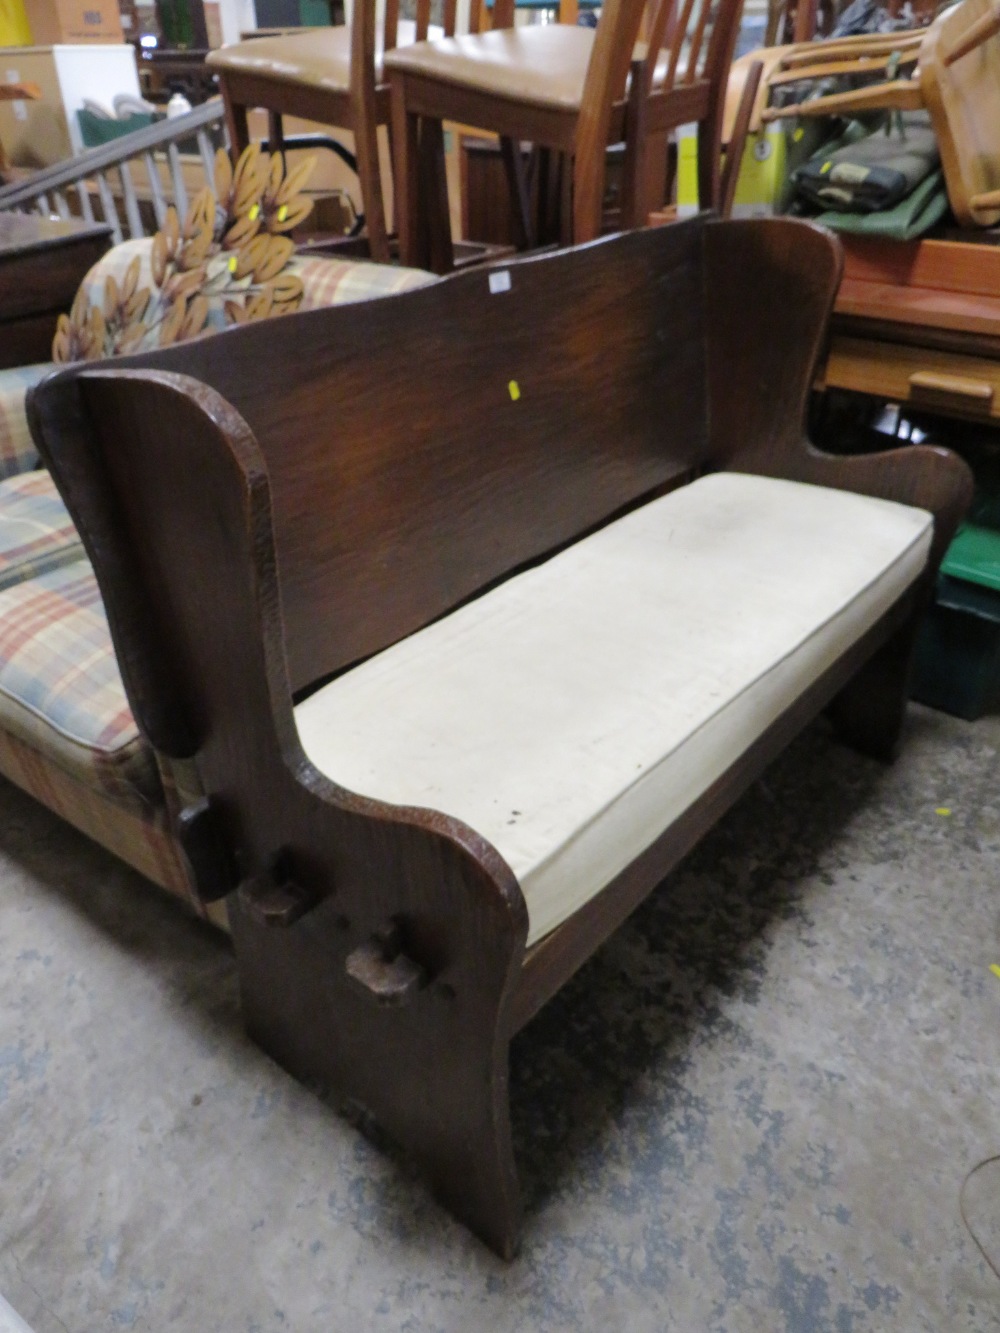 AN UNUSUAL WOODEN BENCH W-130 CM - Image 2 of 3